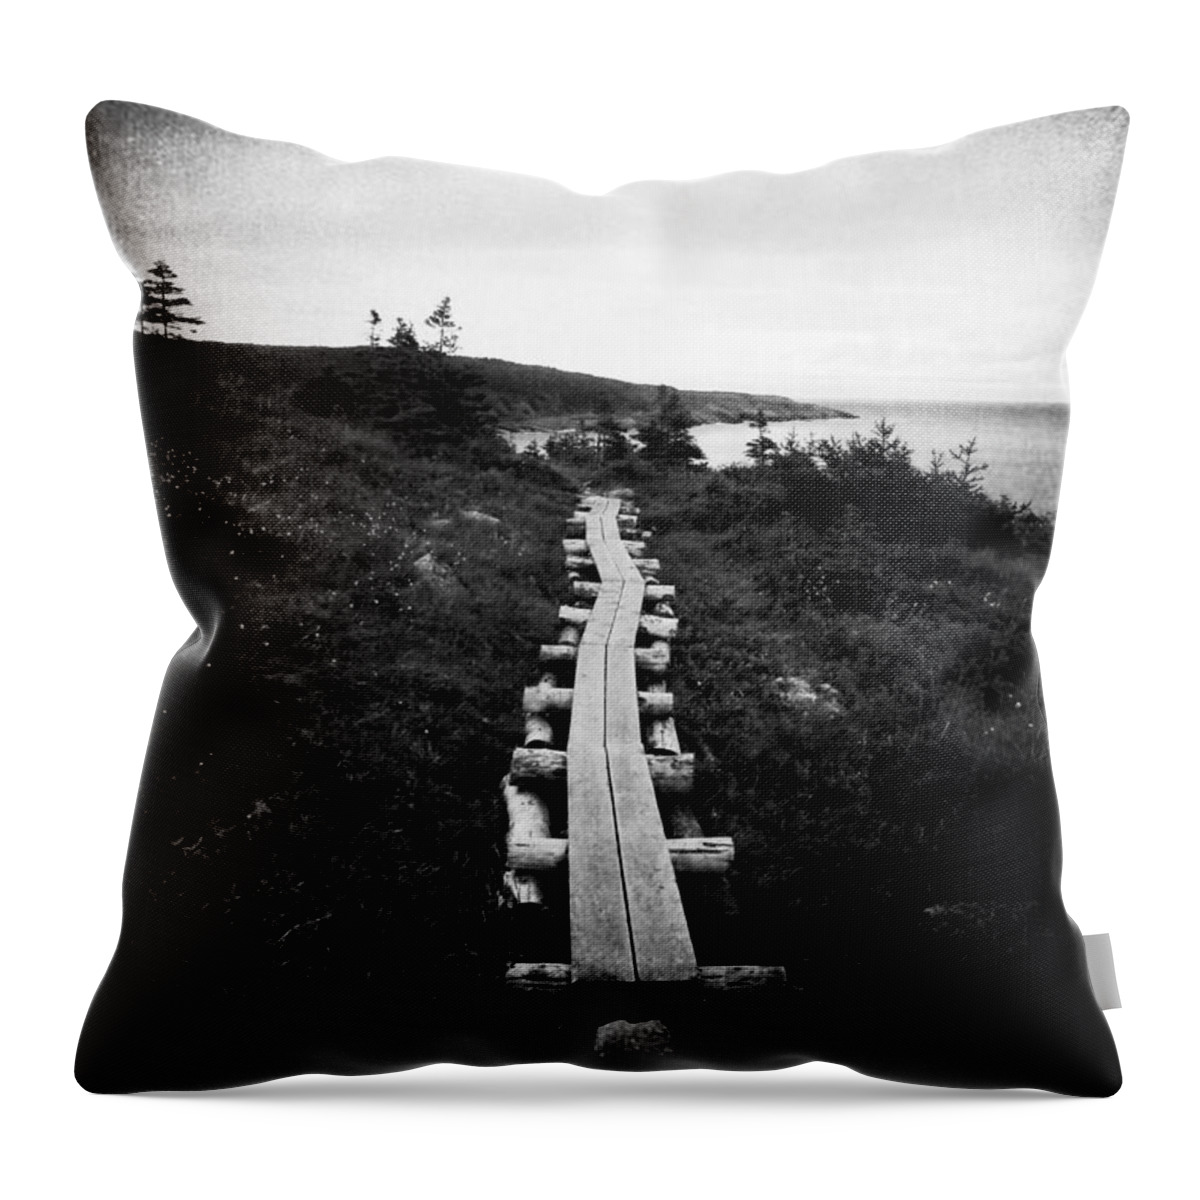 Sea Throw Pillow featuring the photograph Take Me to the Sea - East Coast Trail by Zinvolle Art